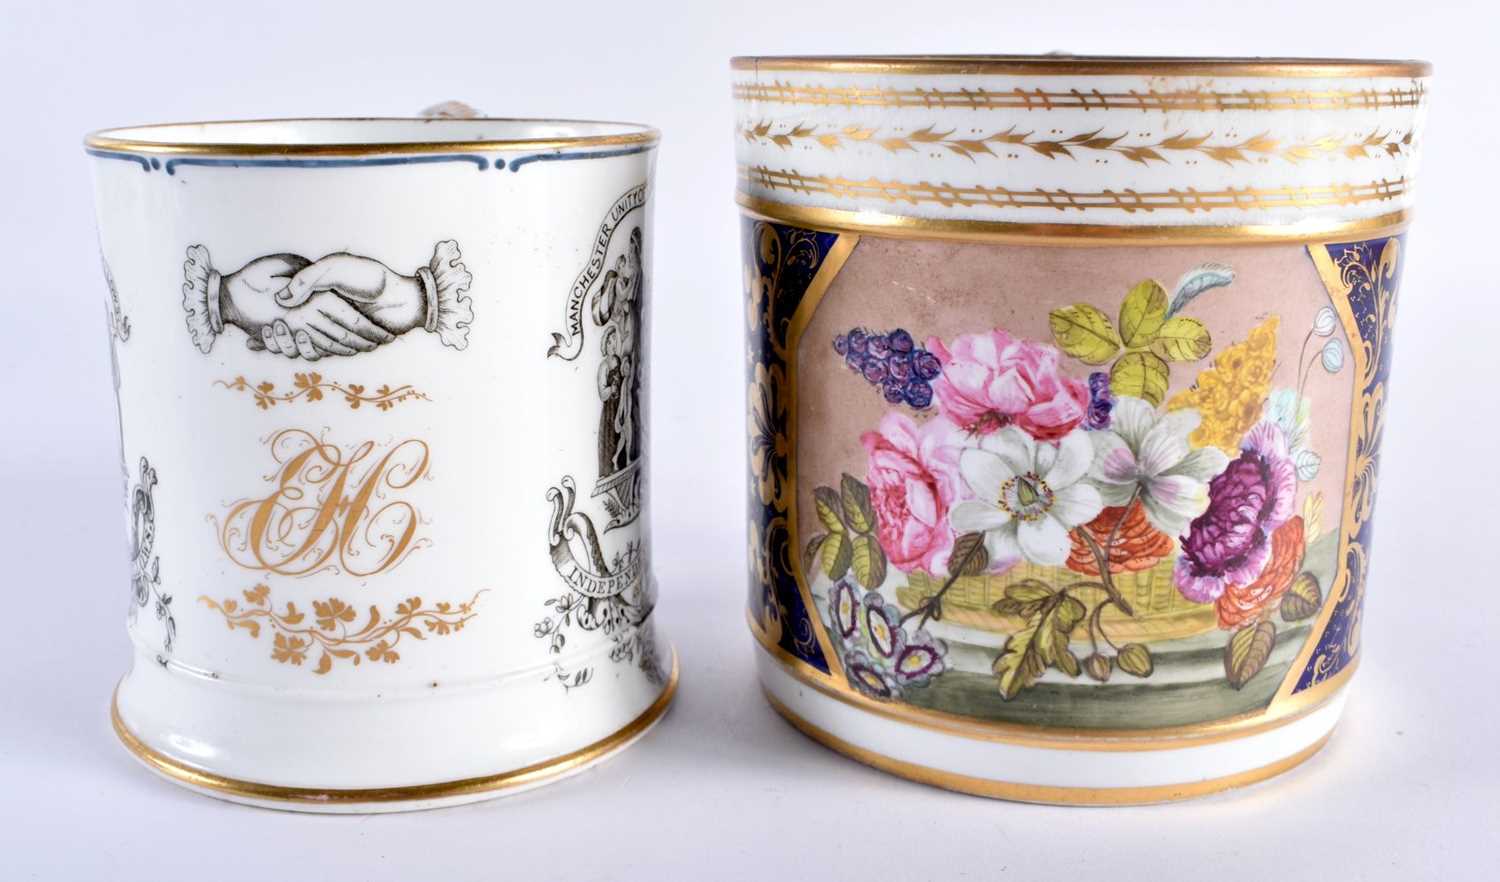 Early 19th century Derby porter mug lavishly painted with flowers on a marble table and a mug made - Image 2 of 5